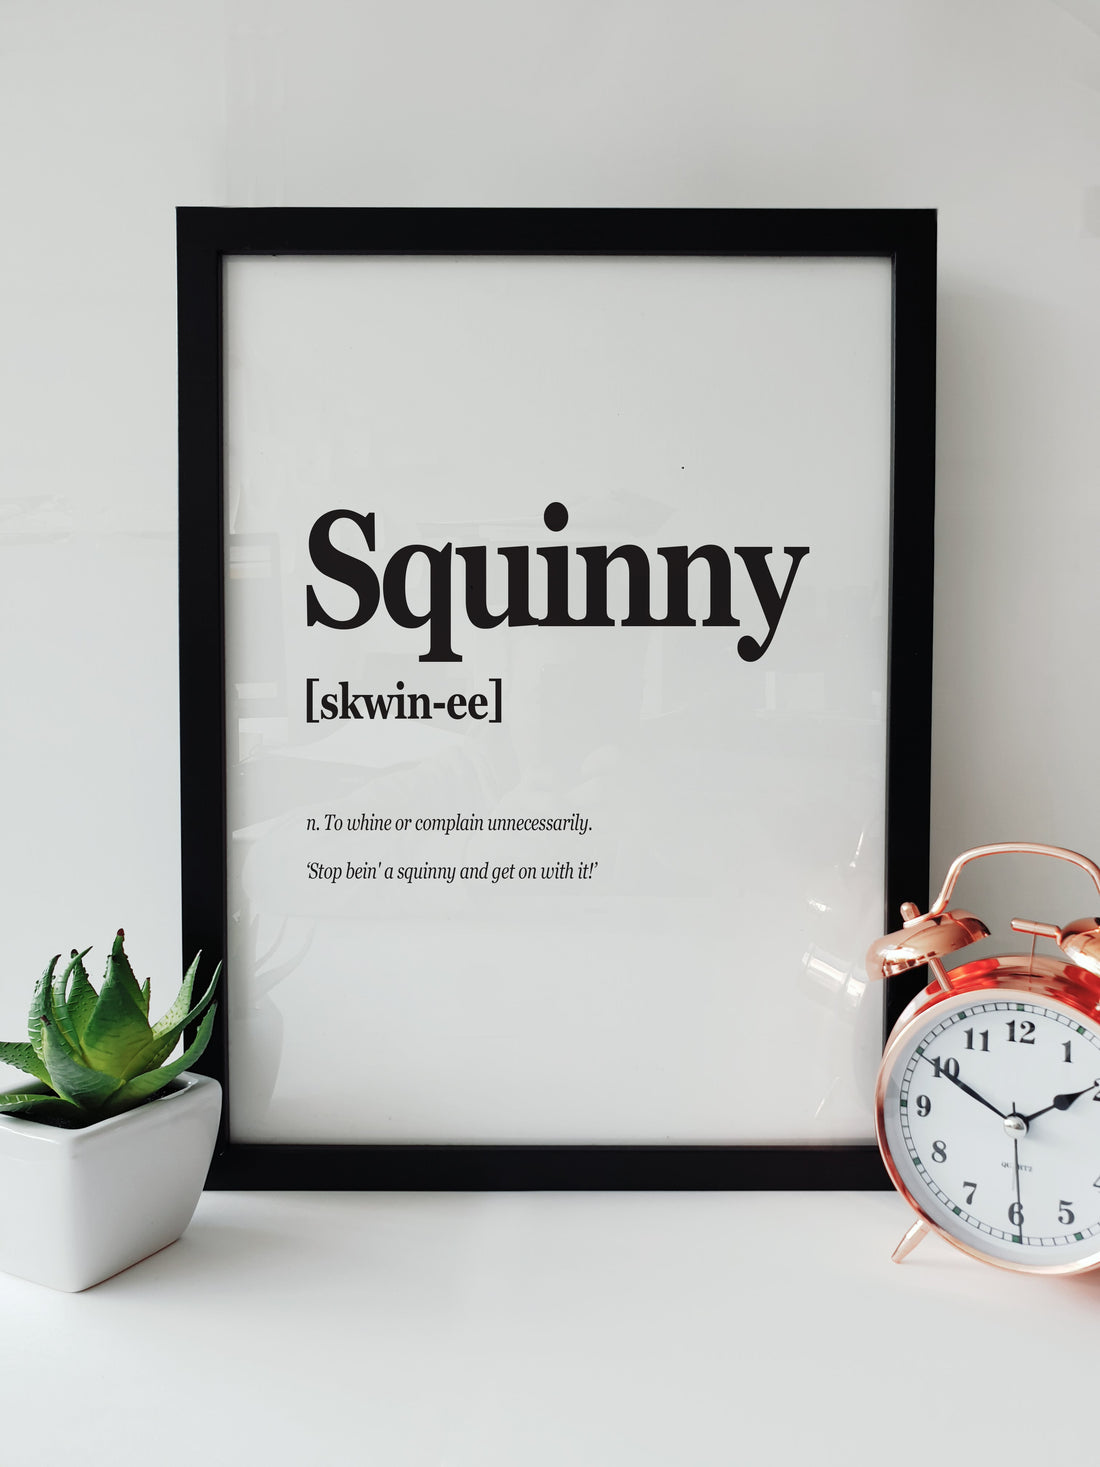 Framed Portsmouth Dialect Print featuring the word "Squinny" with pronunciation and definition, displayed on a white desk with a plant and a copper alarm clock. pompey translation designed by local lingo